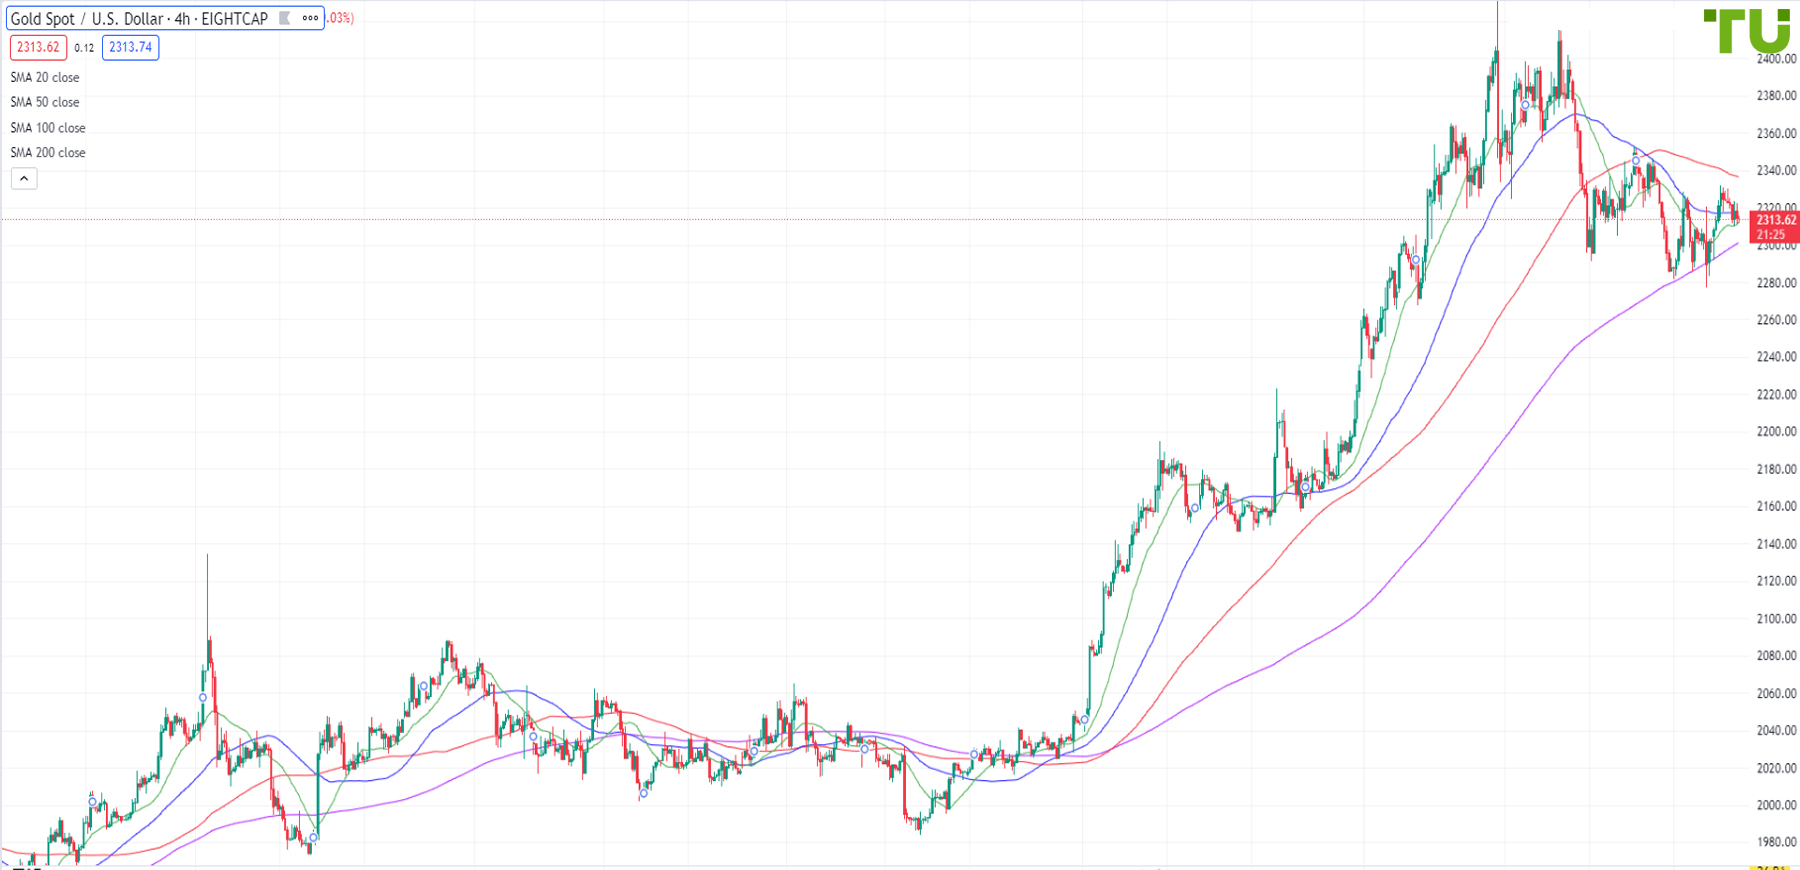 XAU/USD unable to break resistance at 30 per ounce